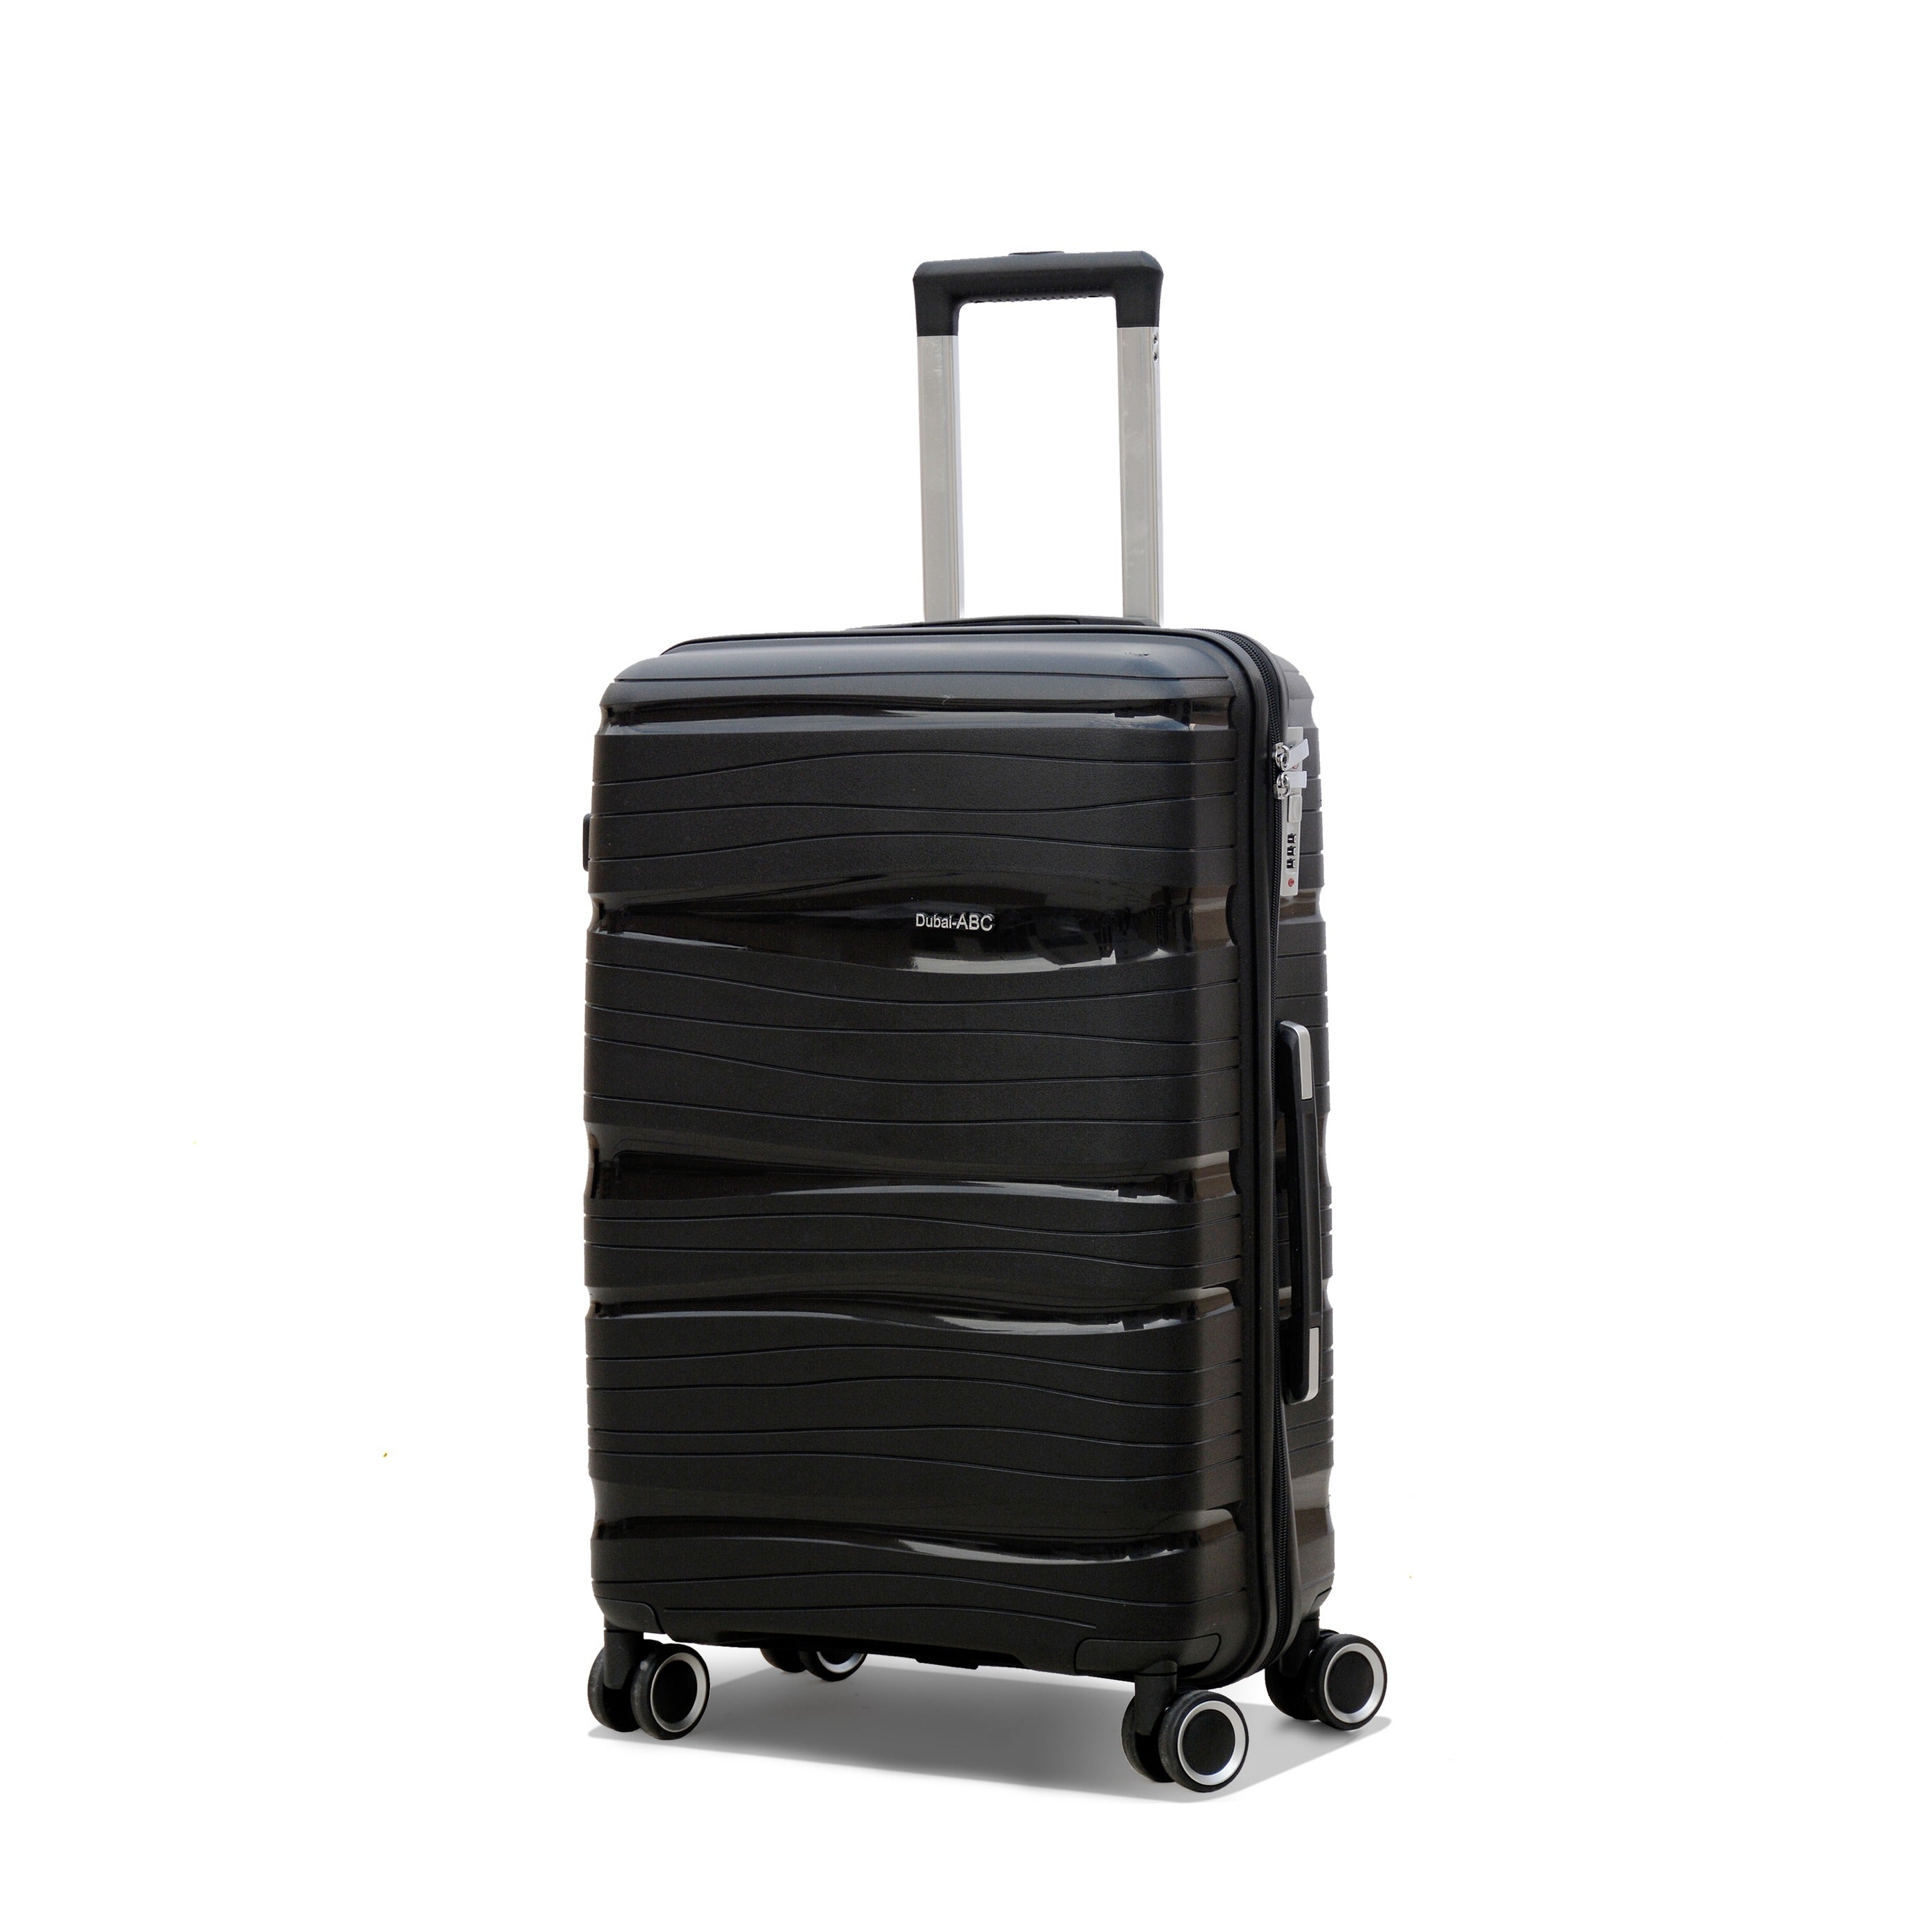 24” PP material Black Luggage Unbreakable Cabin Size Hard Side